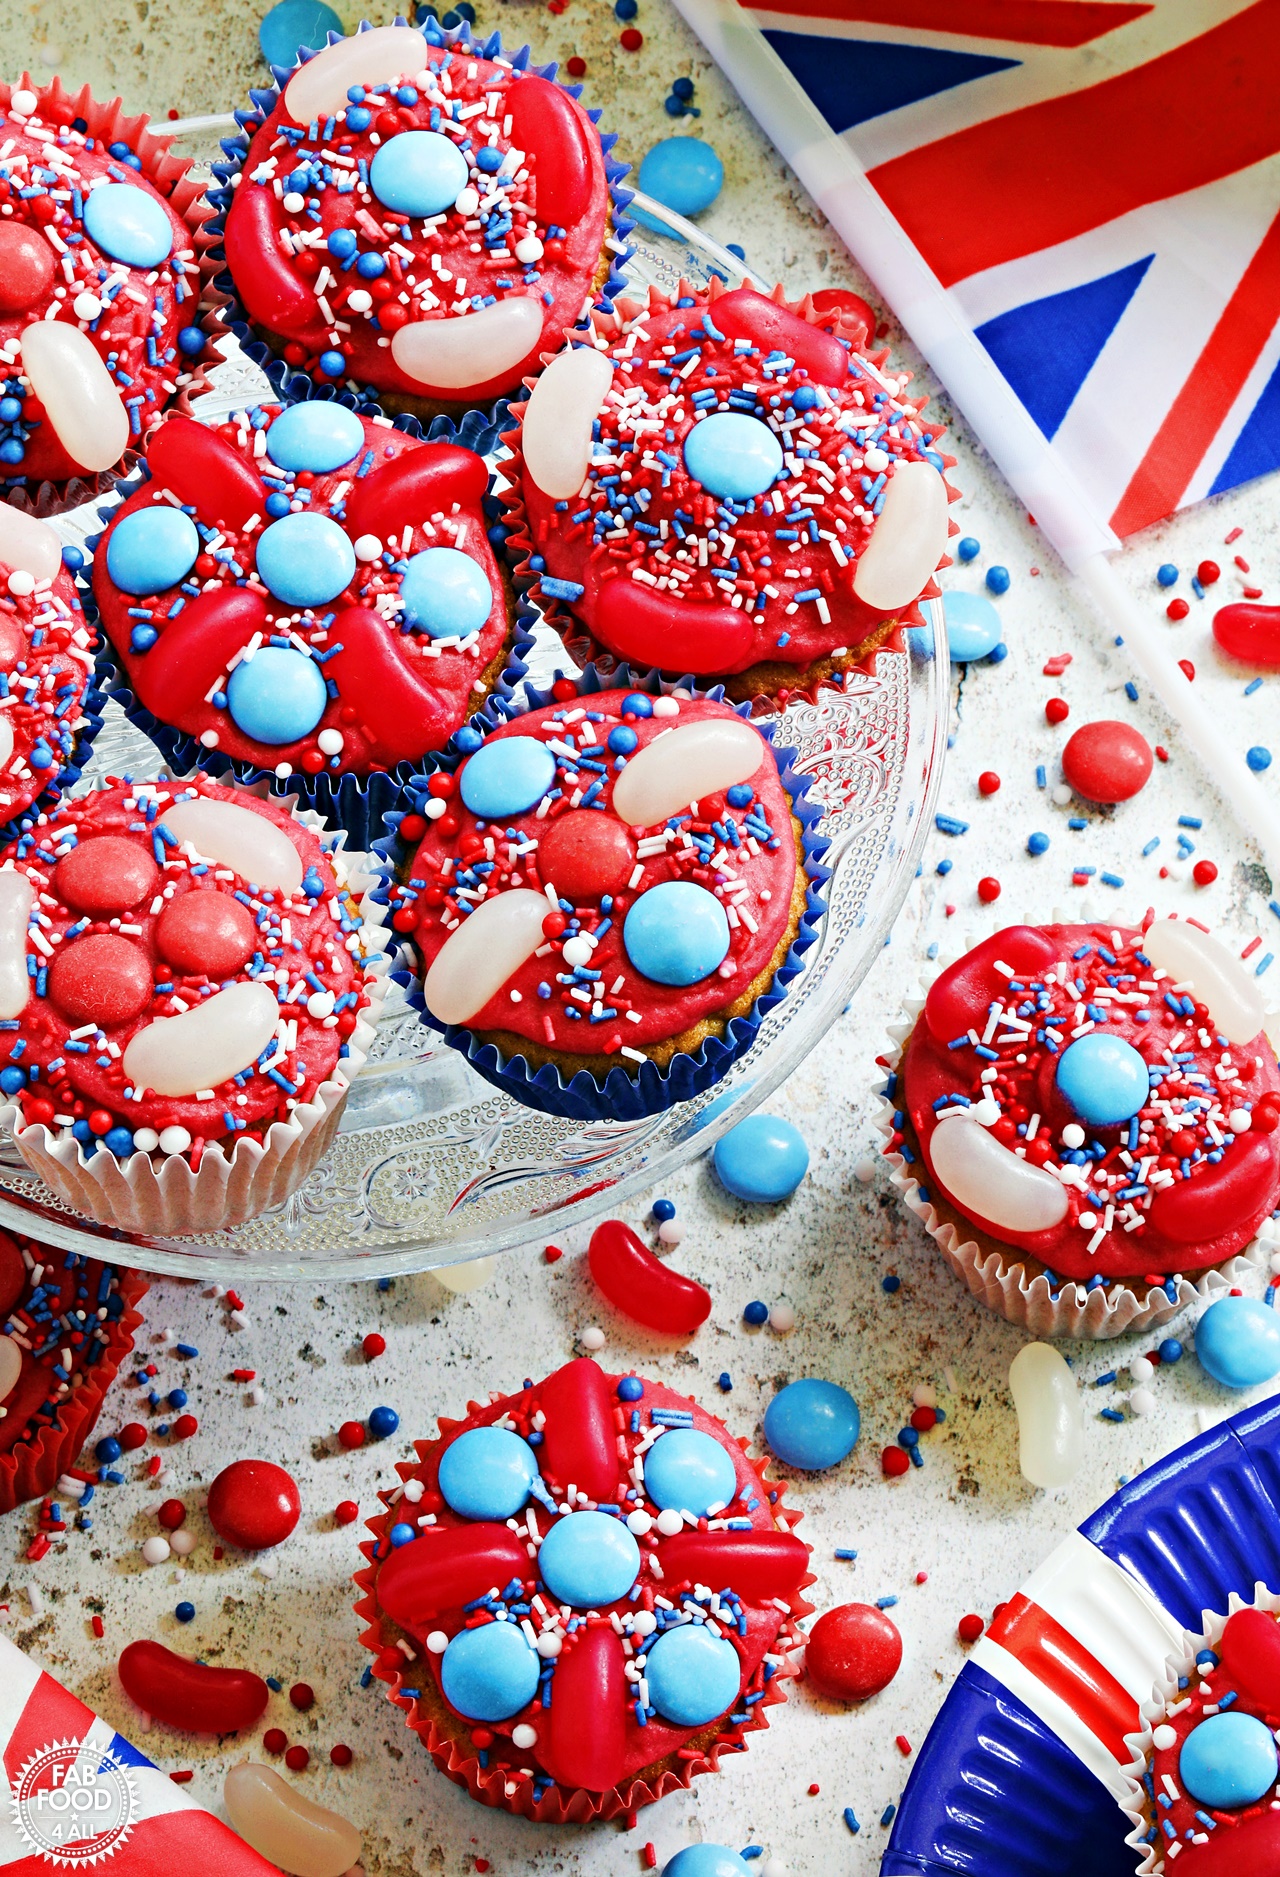 Jubilee Cupcakes on a cake stand with Union Jack flag and plate.